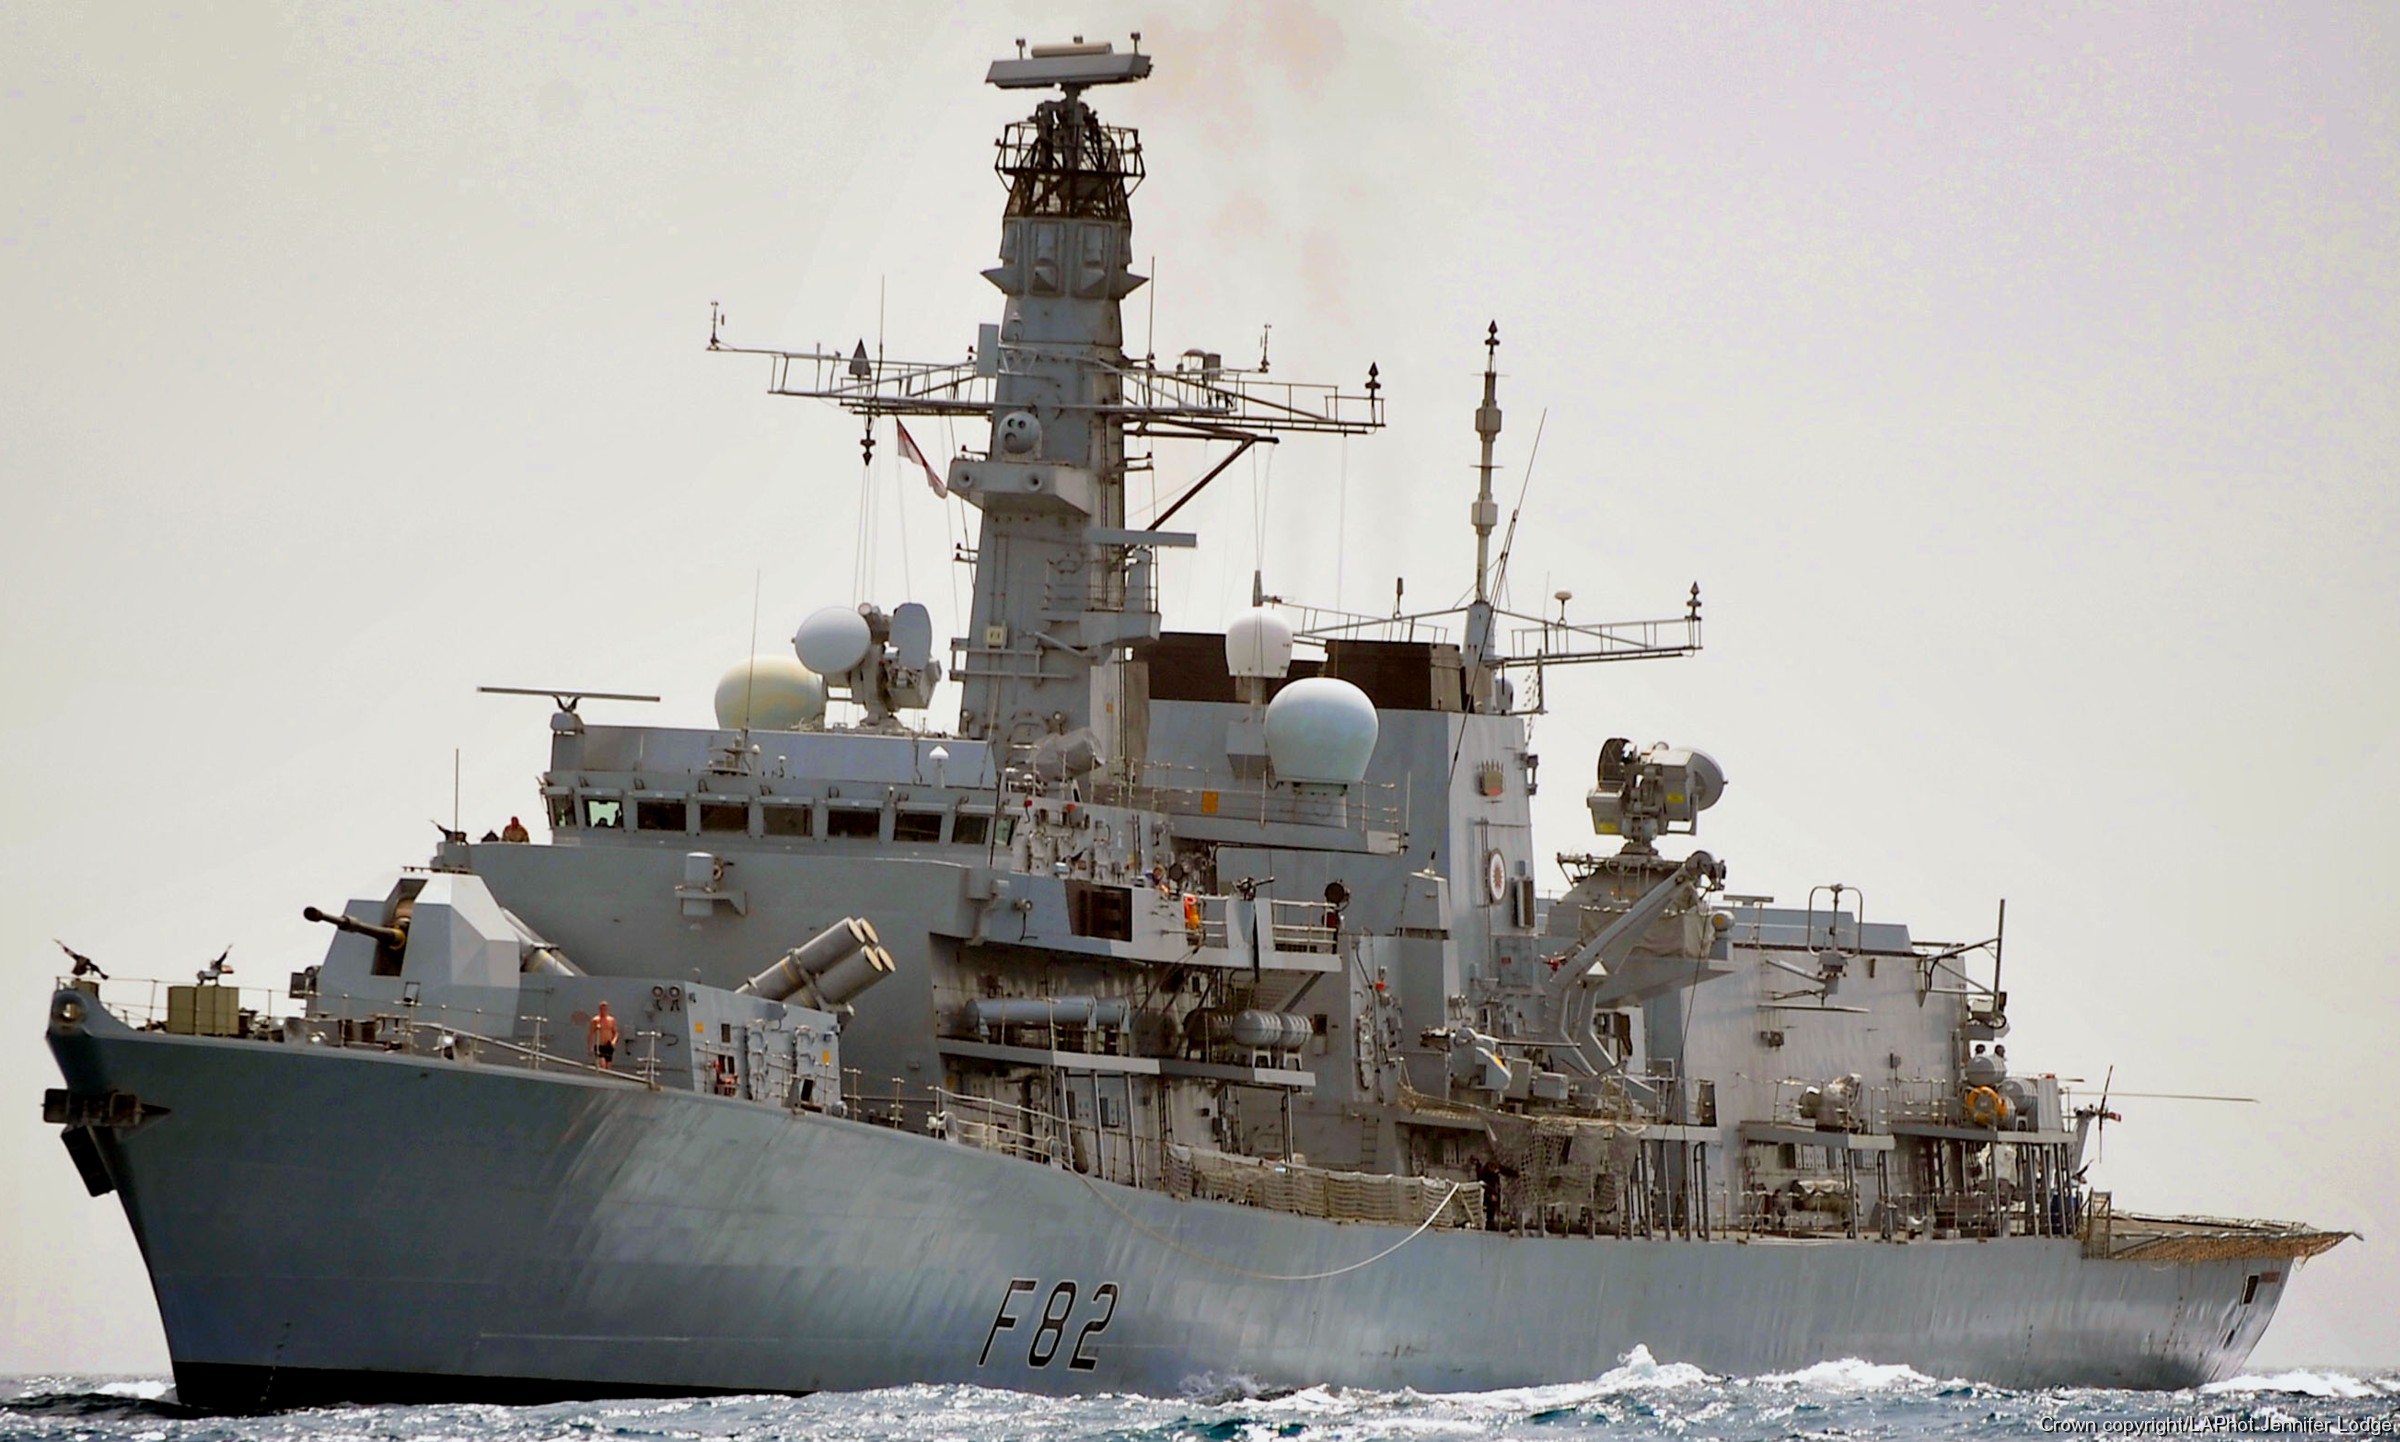 f-82 hms somerset type 23 duke class guided missile frigate ffg royal navy 06